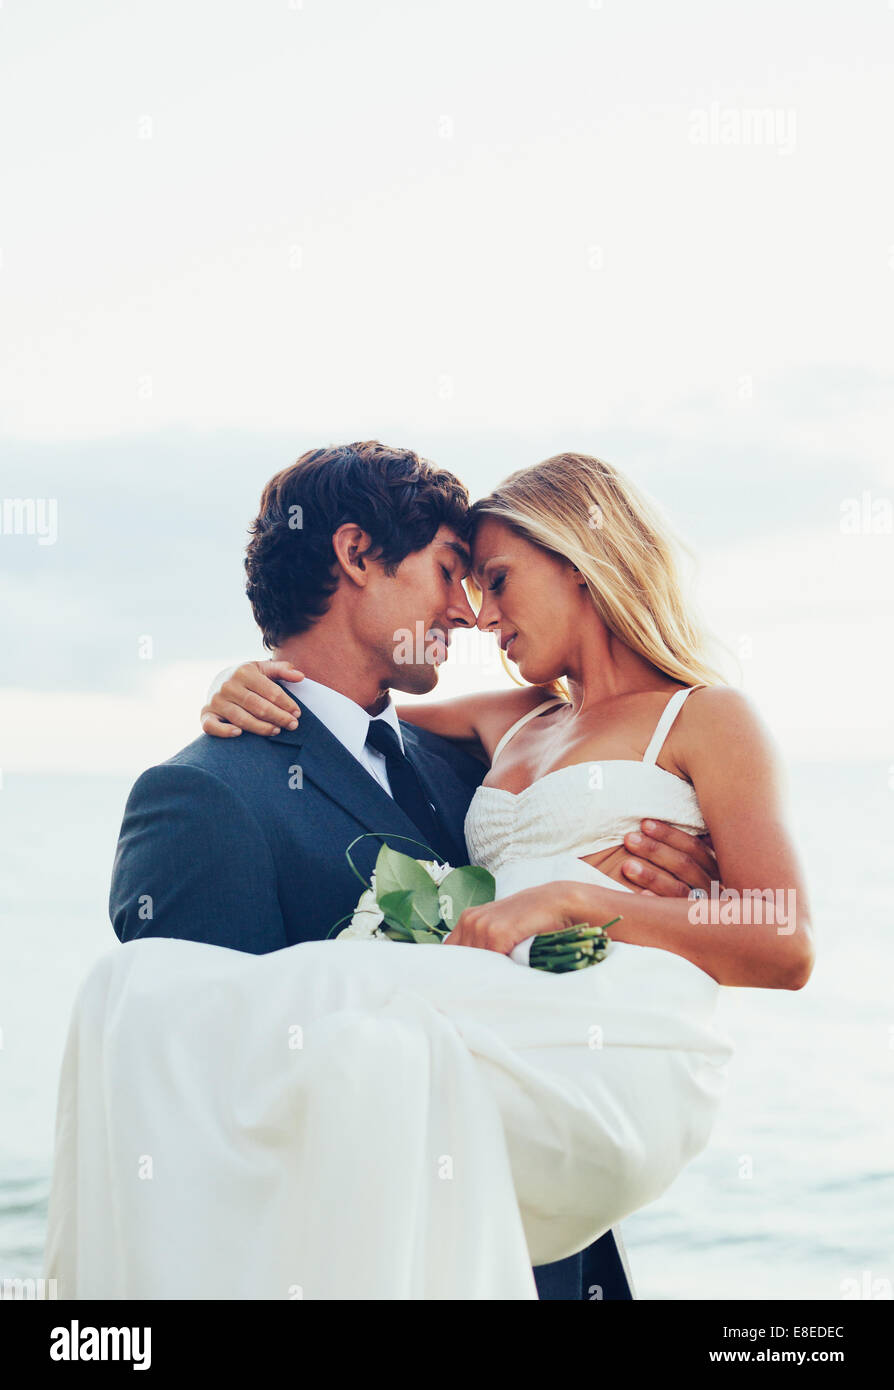 Wedding. Beautiful Romantic Bride and Groom Just Married. Stock Photo